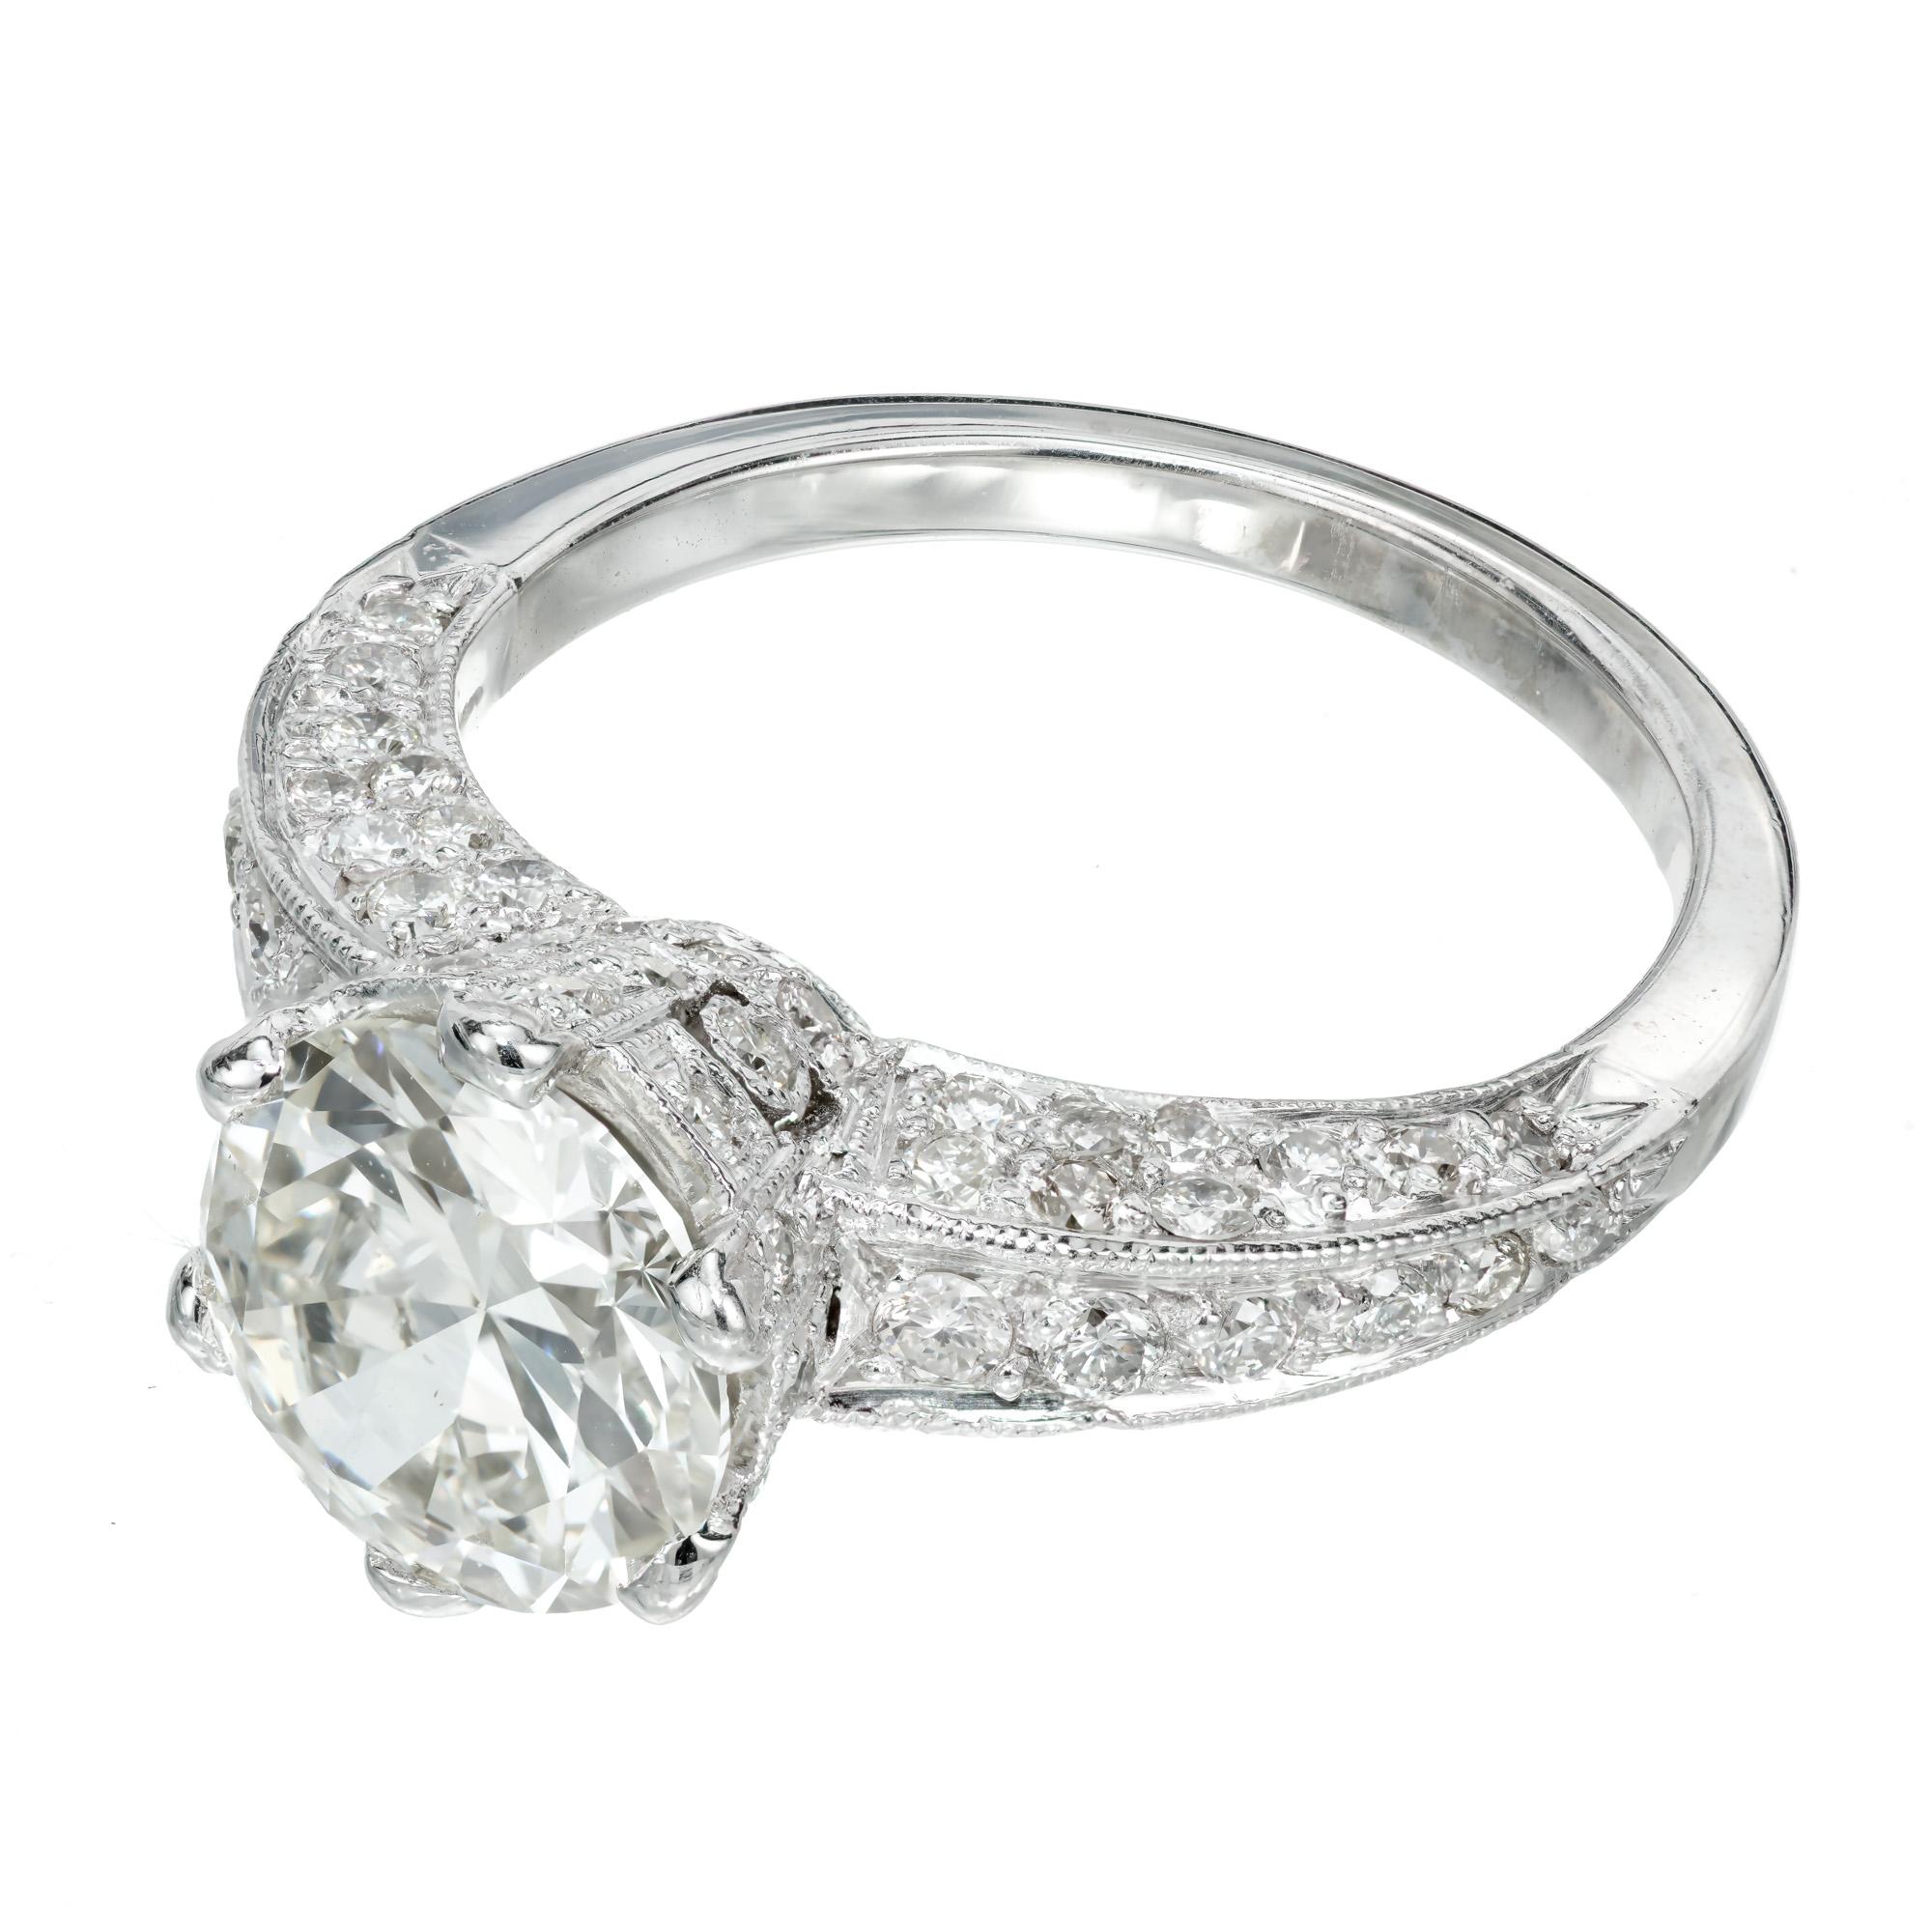 1940's transitional cut round diamond engagement ring. EGL certified round transitional cut diamond in a platinum six prong setting with 58 round accent diamonds. 

1 round transitional diamond total weight 1.77ct, J-K, SI1, 8.12mm across. 54.3%